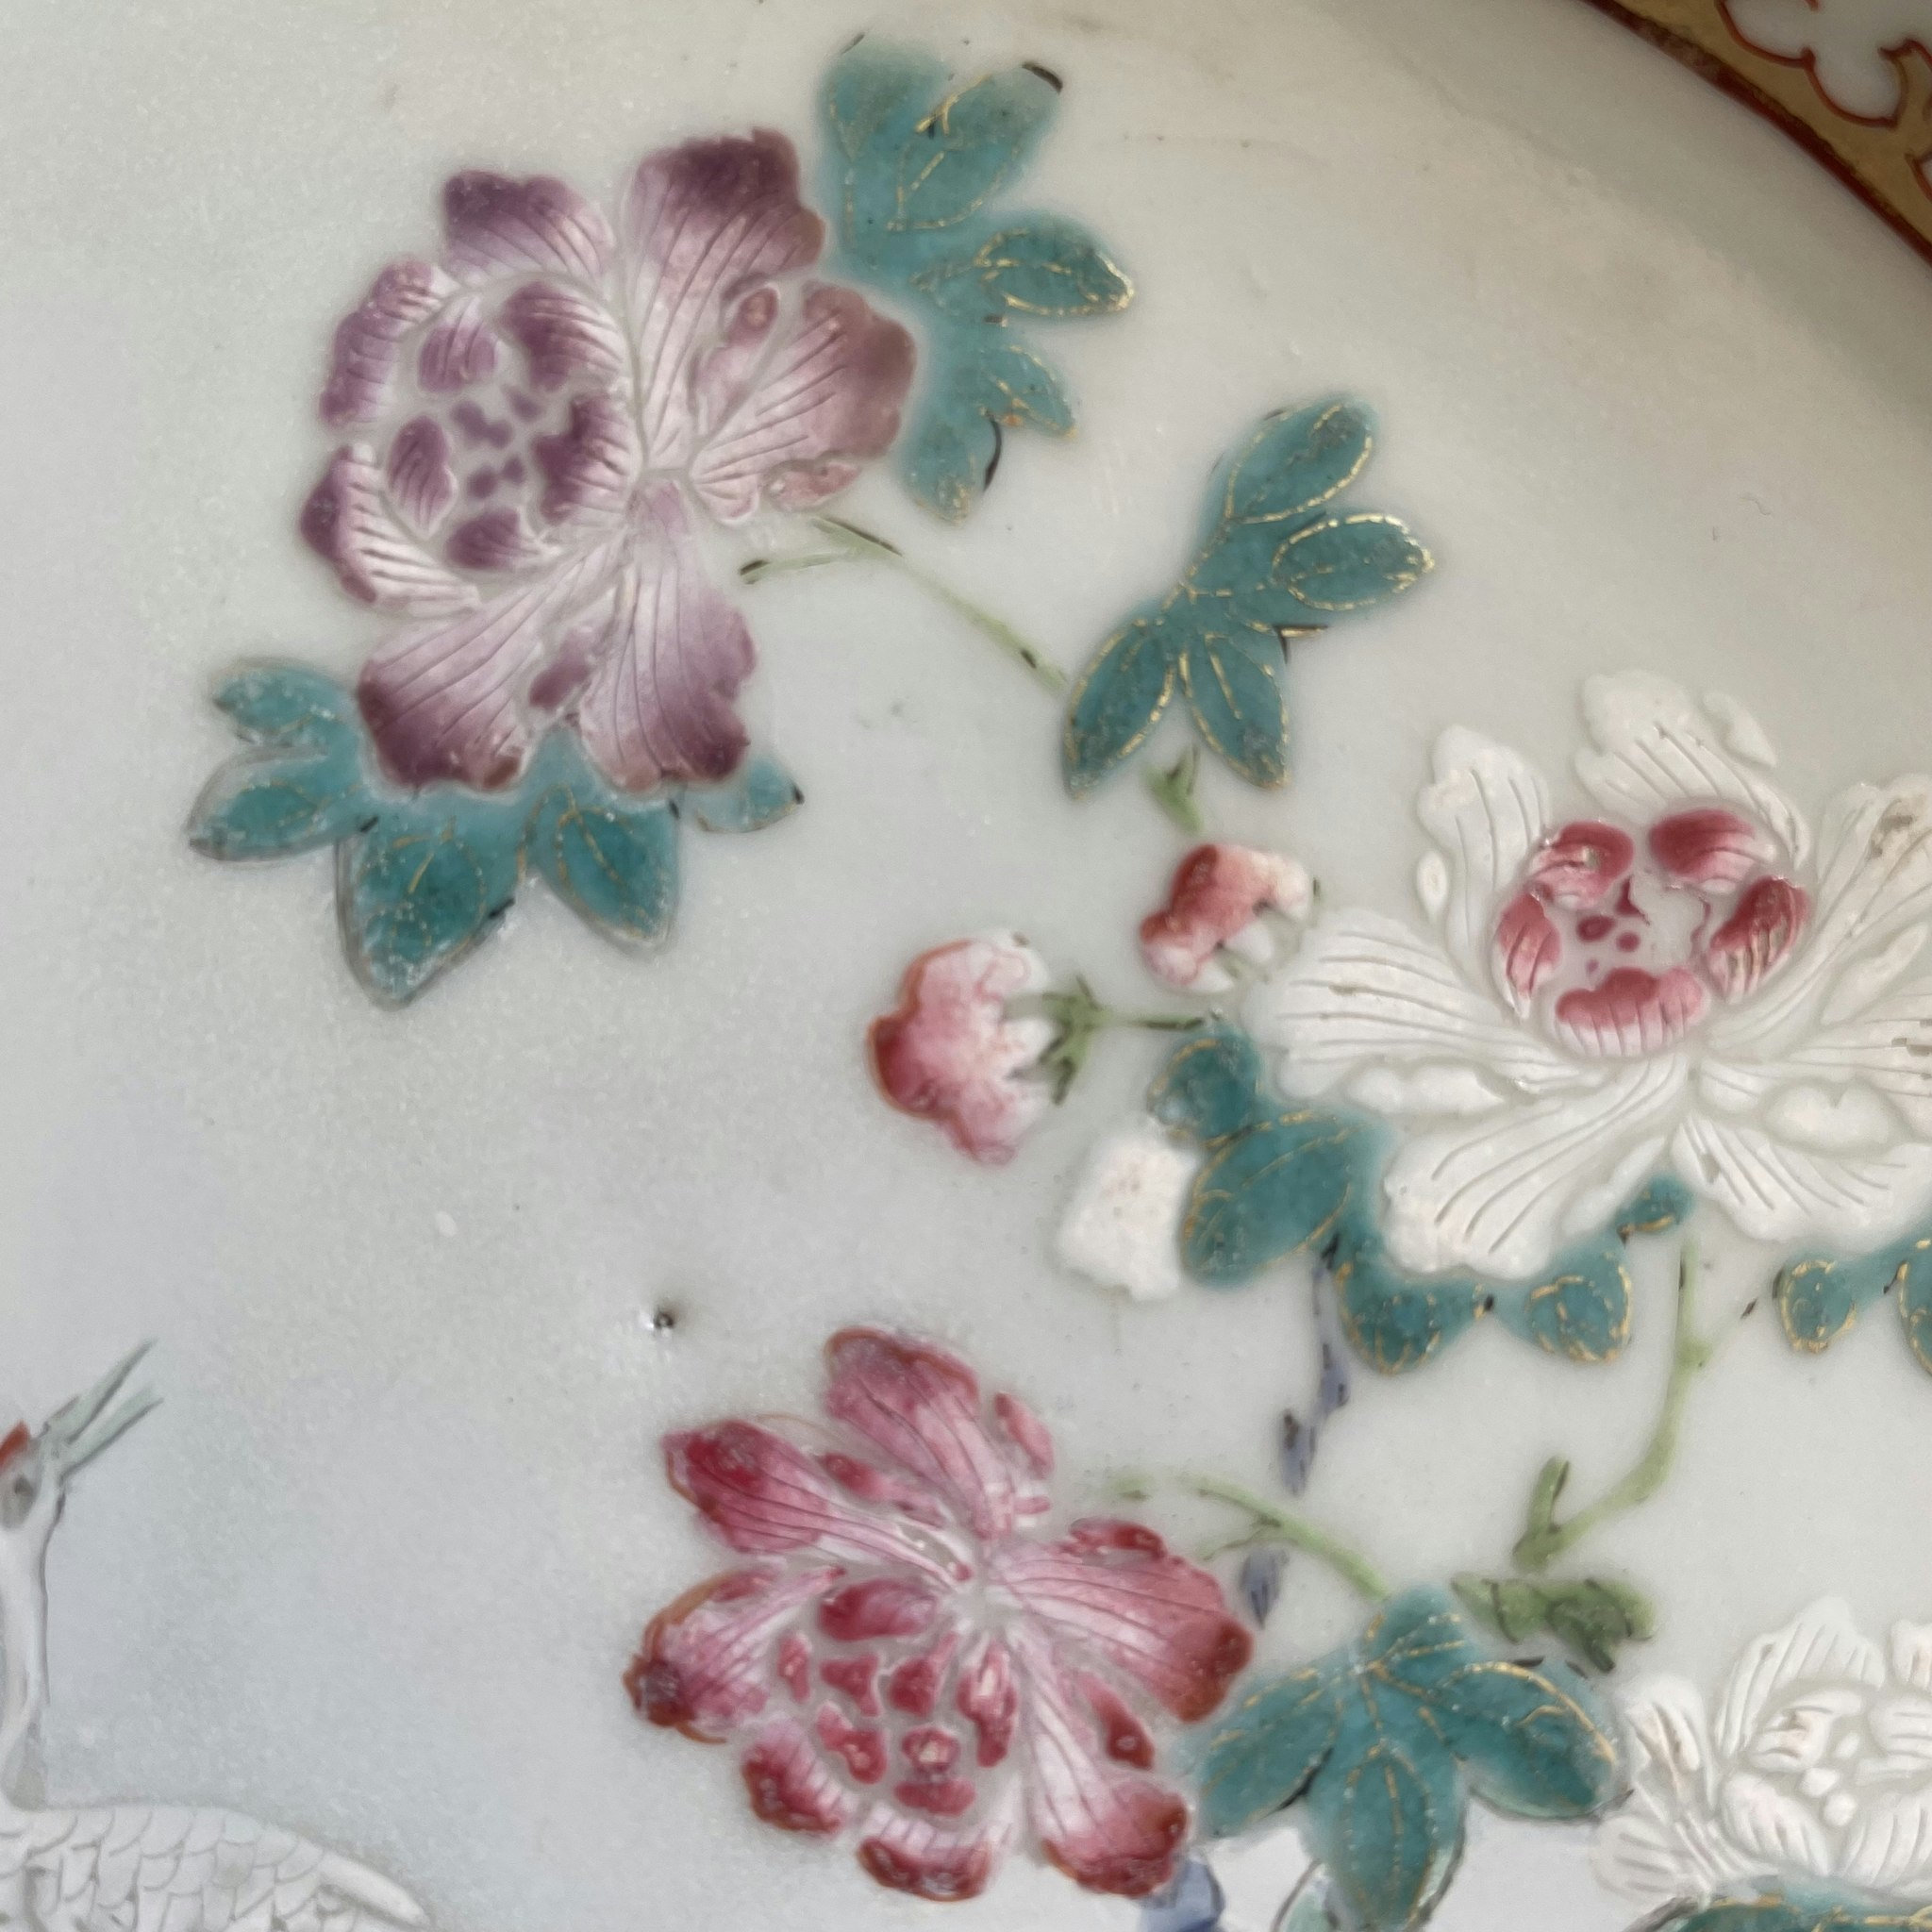 Chinese famille rose octagonal plate, Qianlong, 18th c #1487